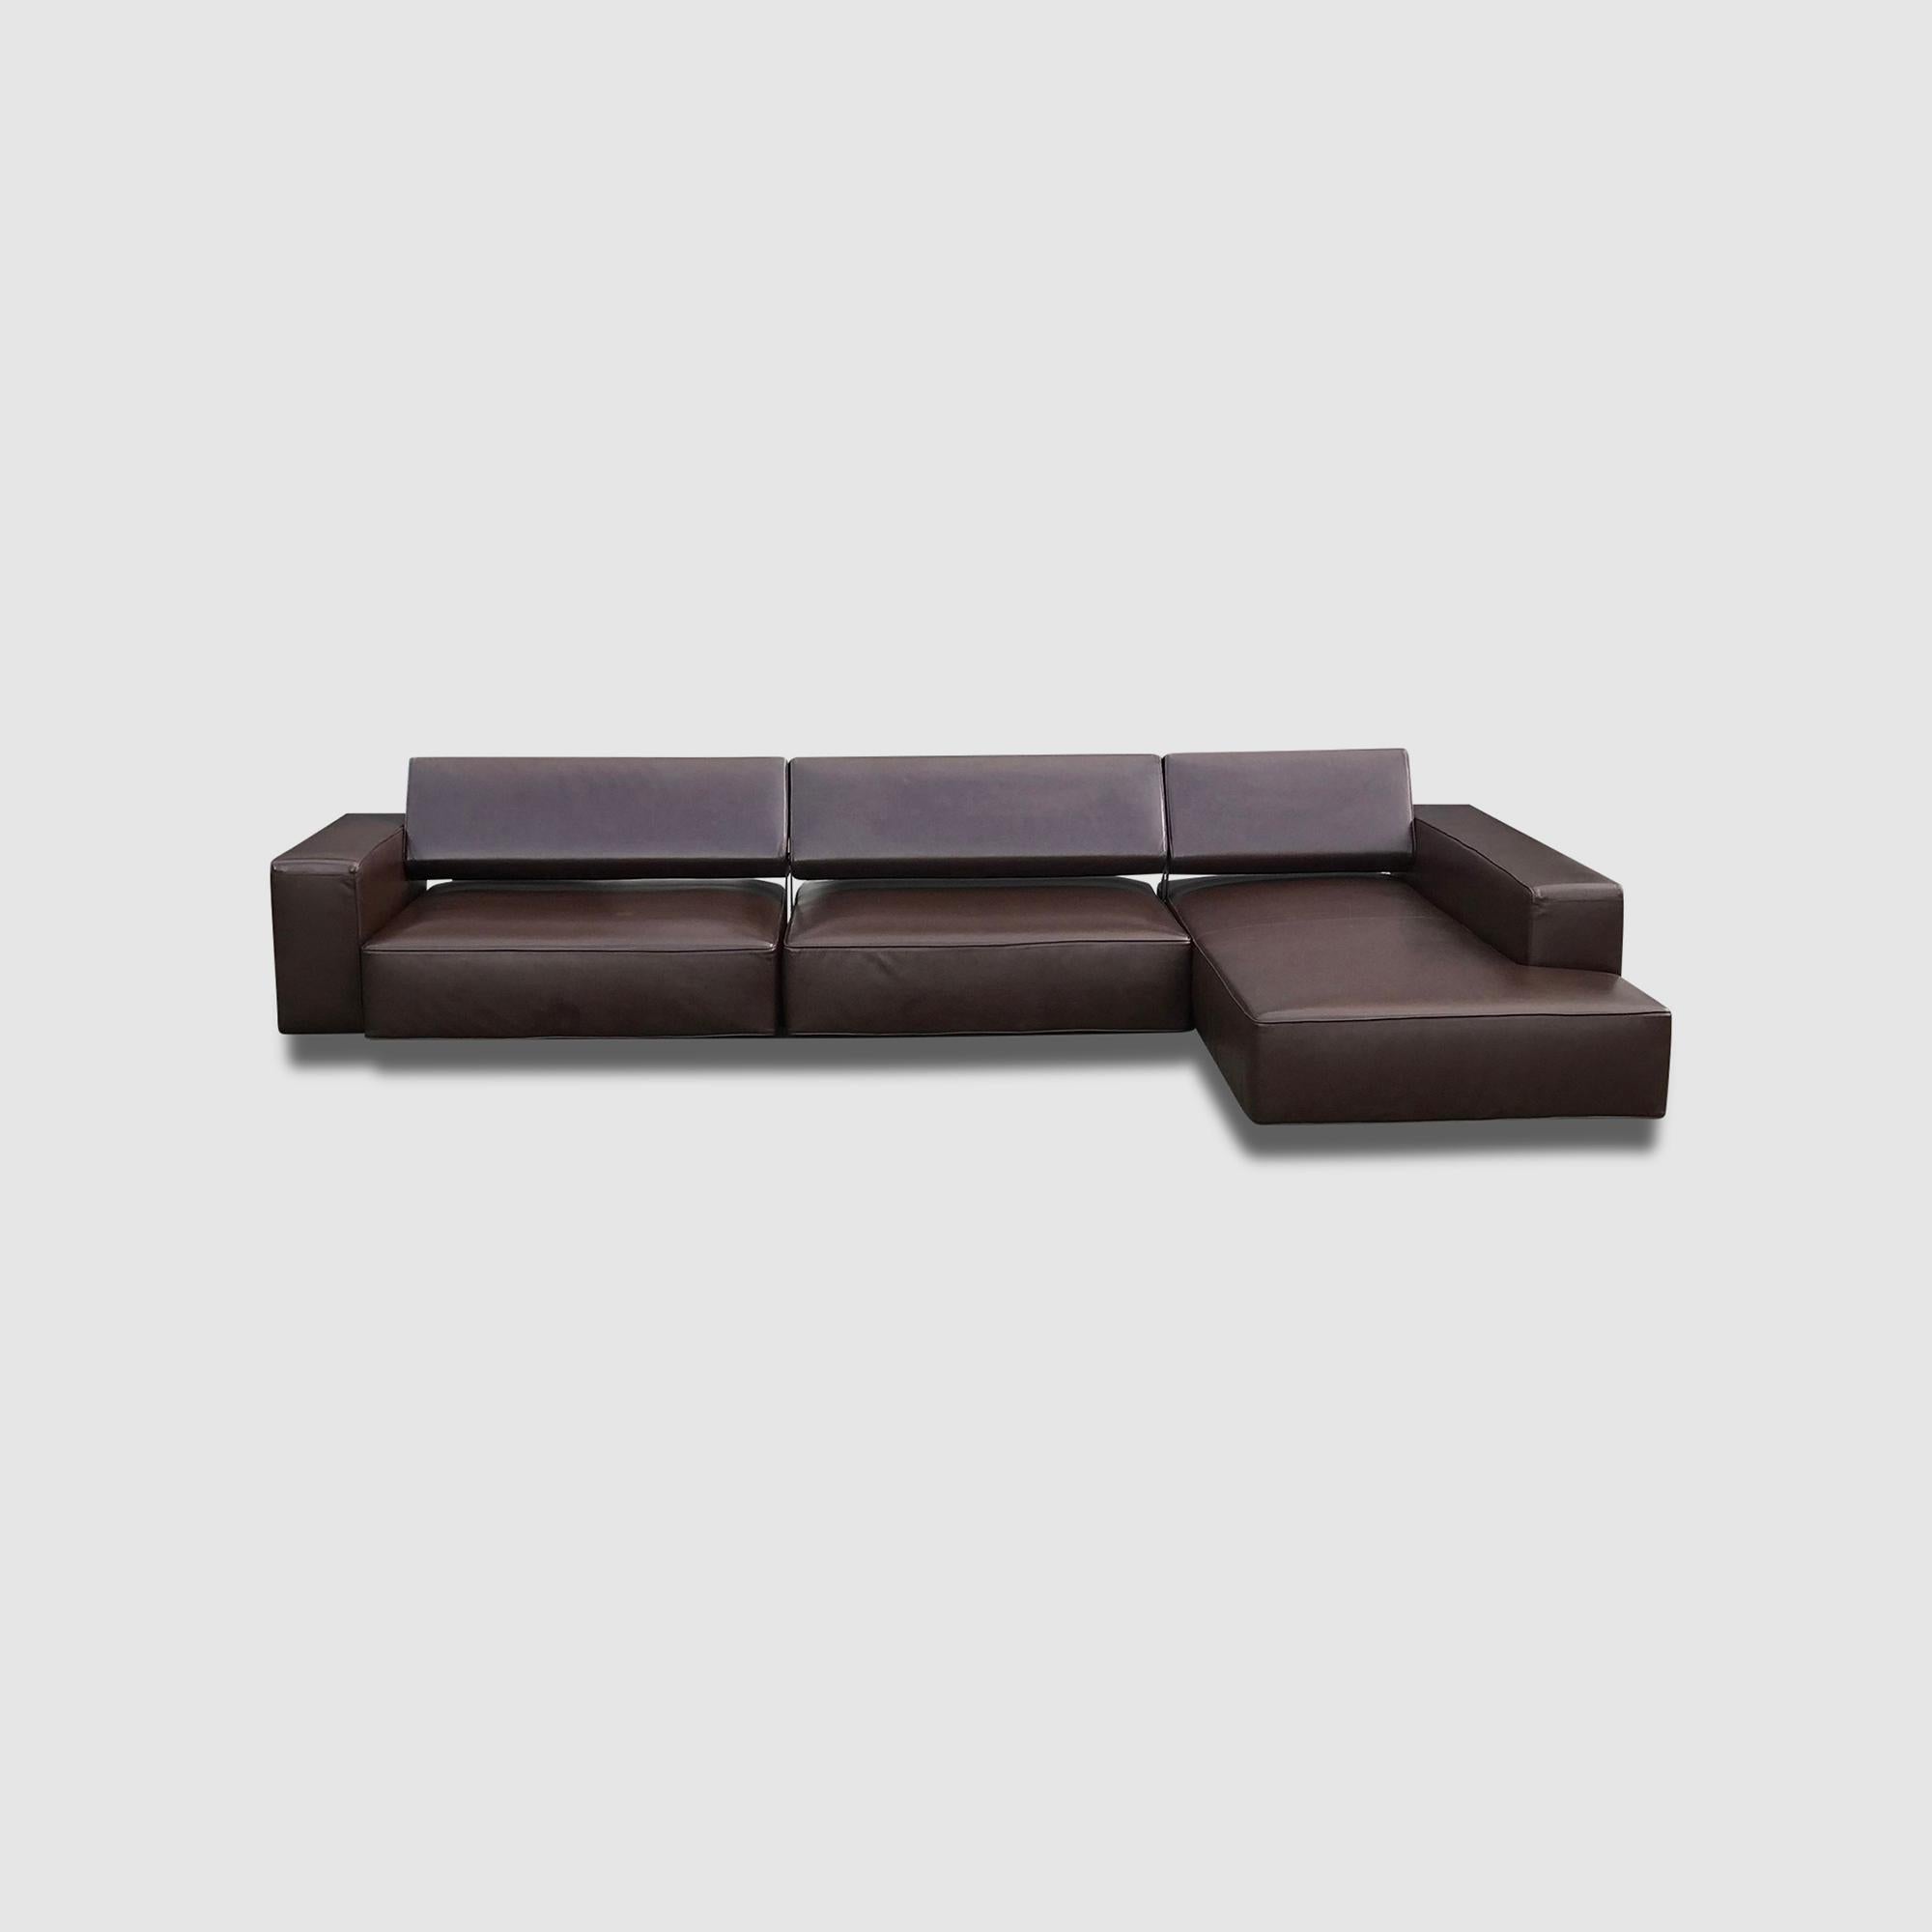 Modular Leather Andy Landscape Sofa by Paolo Piva for B&B Italia 2013 8